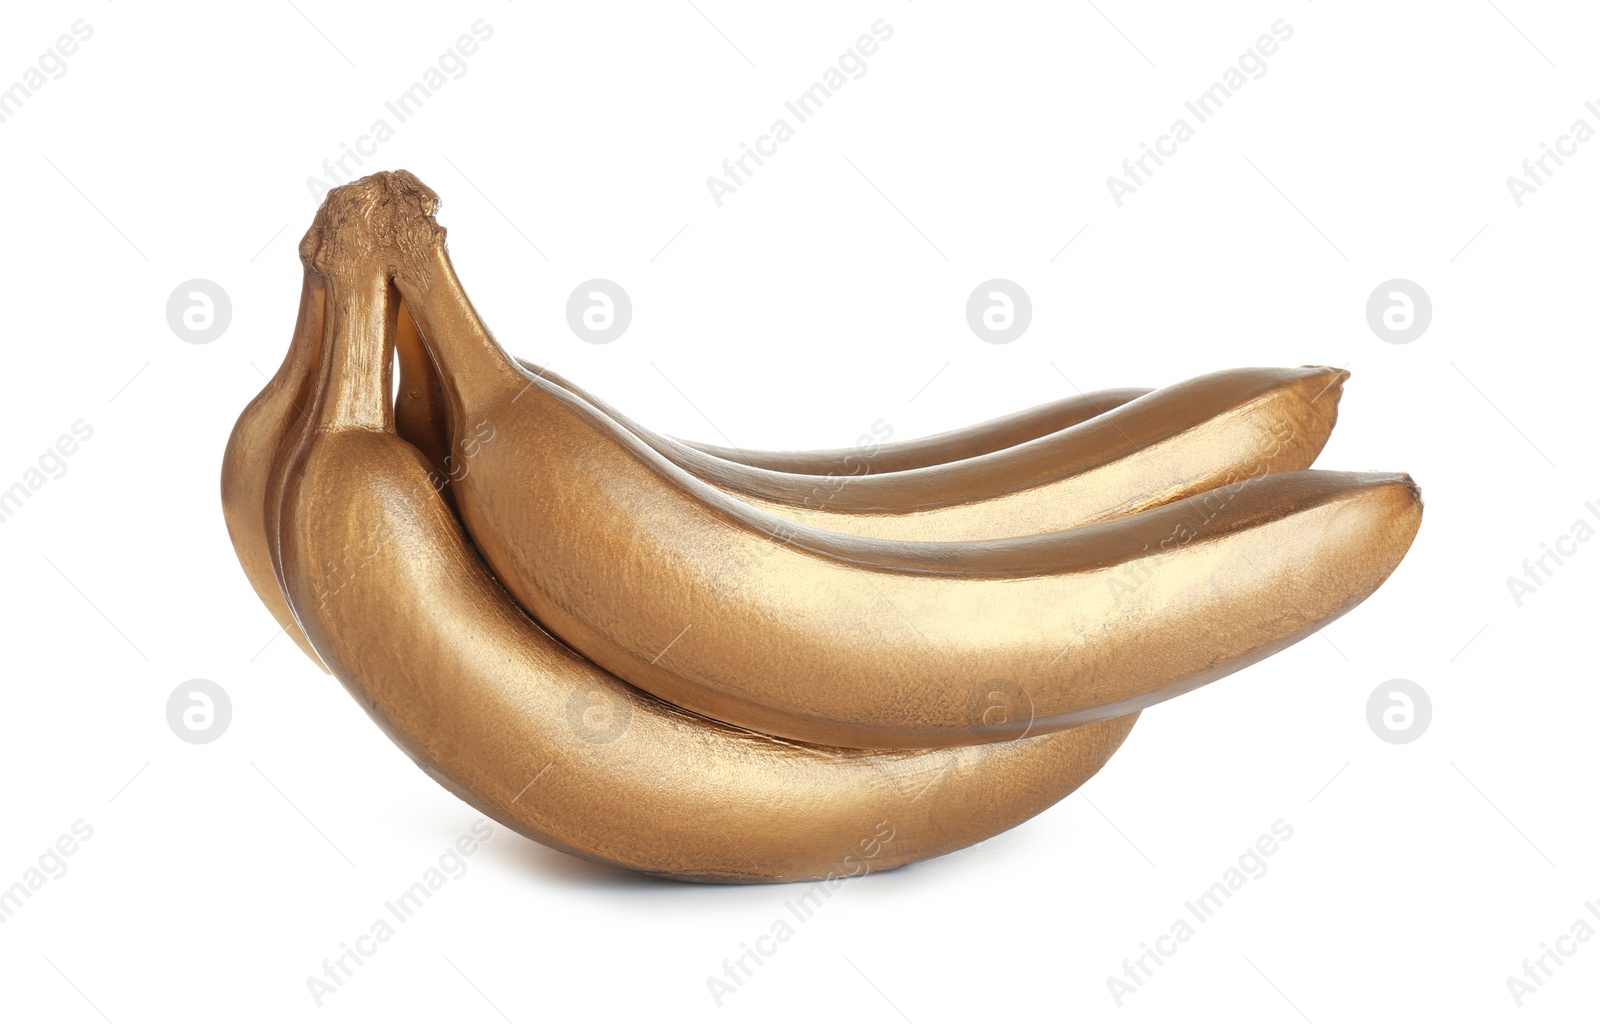 Photo of Bunch of gold painted bananas isolated on white